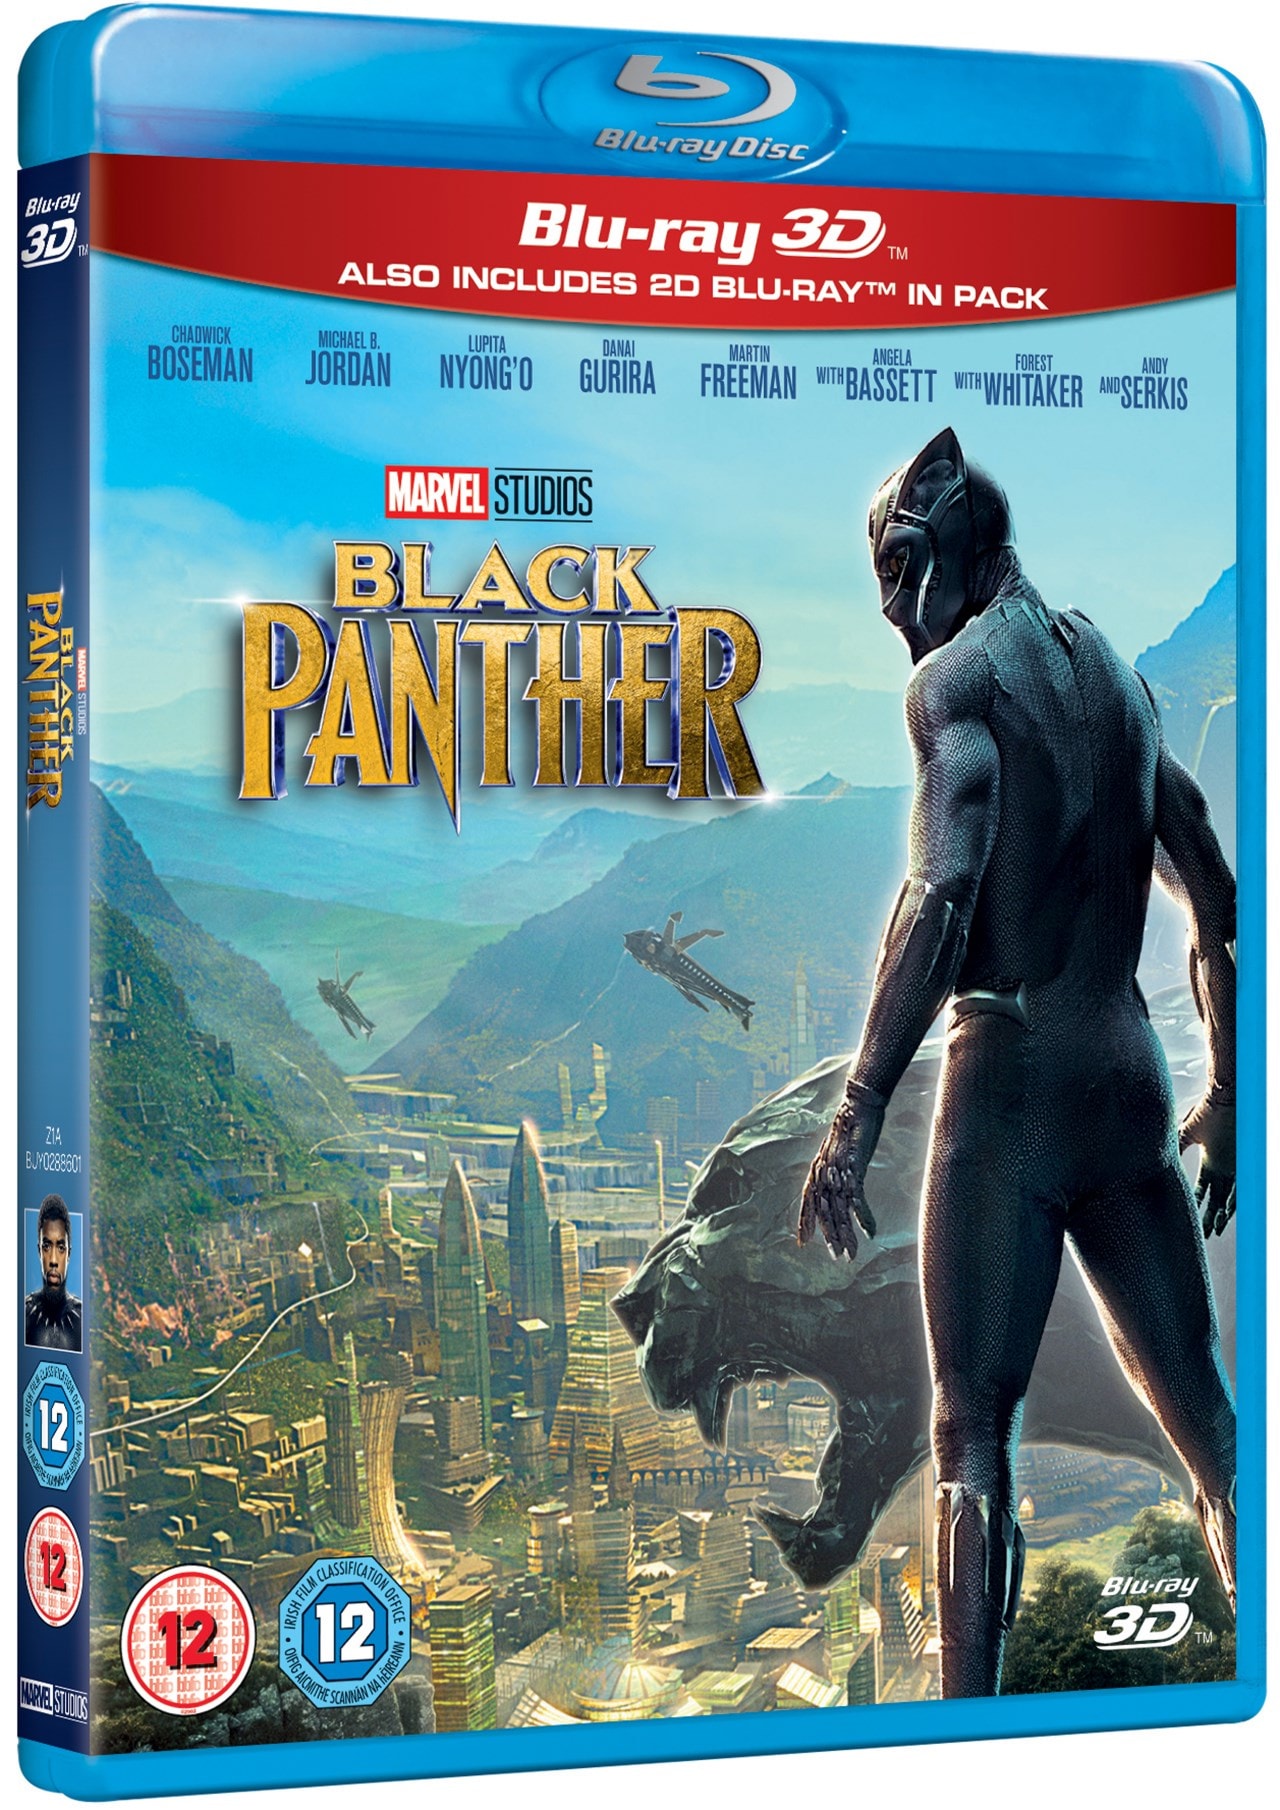 Black Panther | Blu-ray 3D | Free shipping over £20 | HMV Store